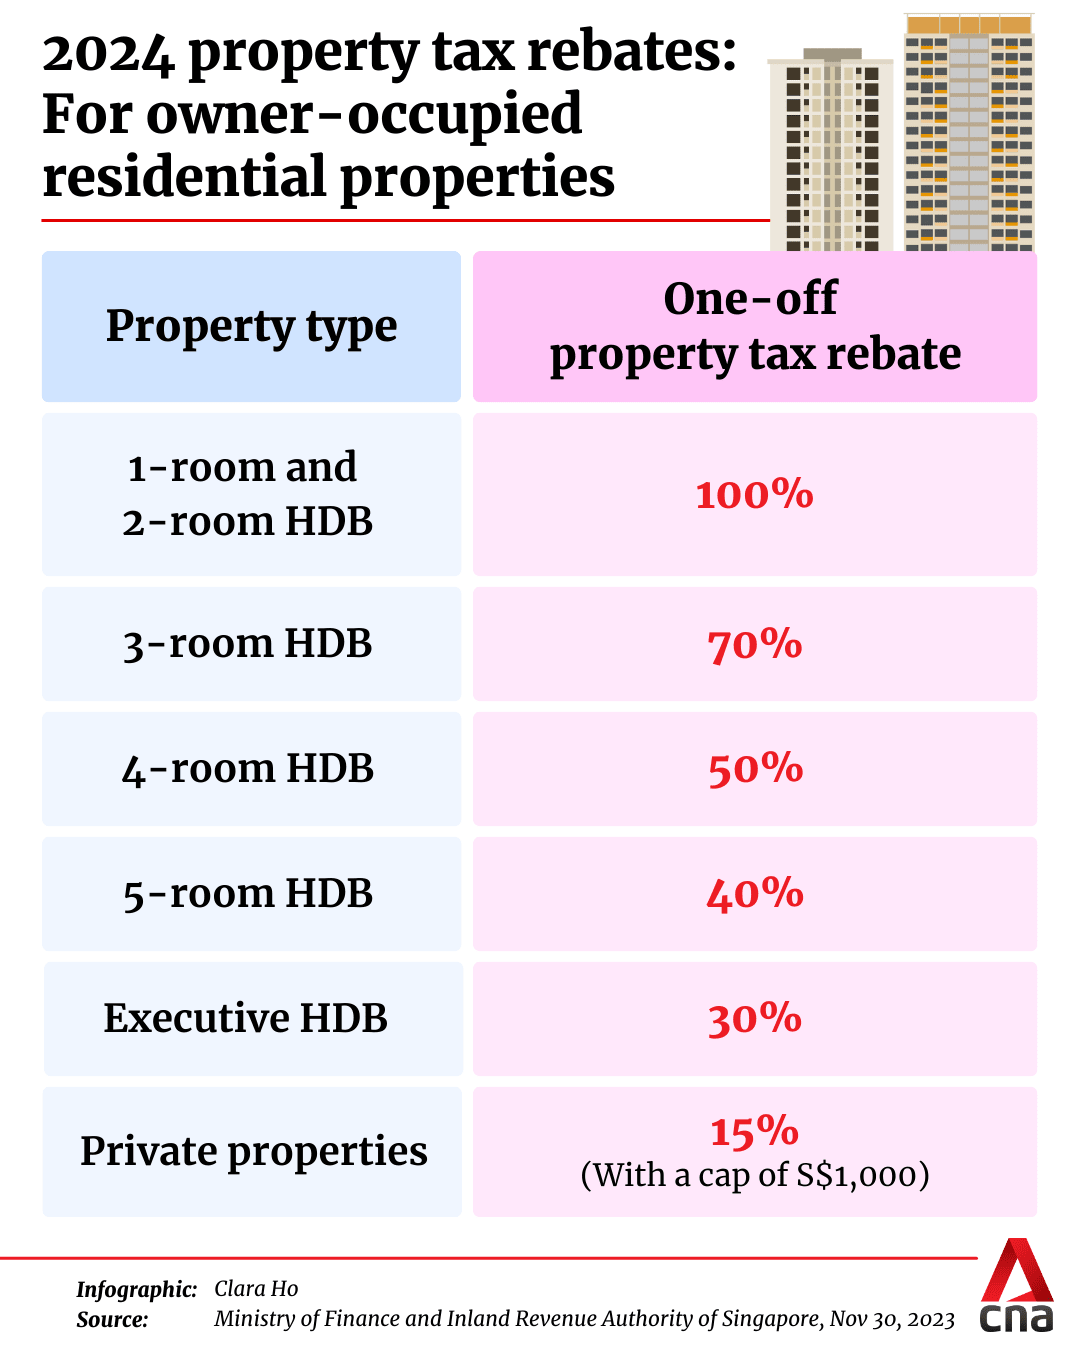 transfer of property in singapore